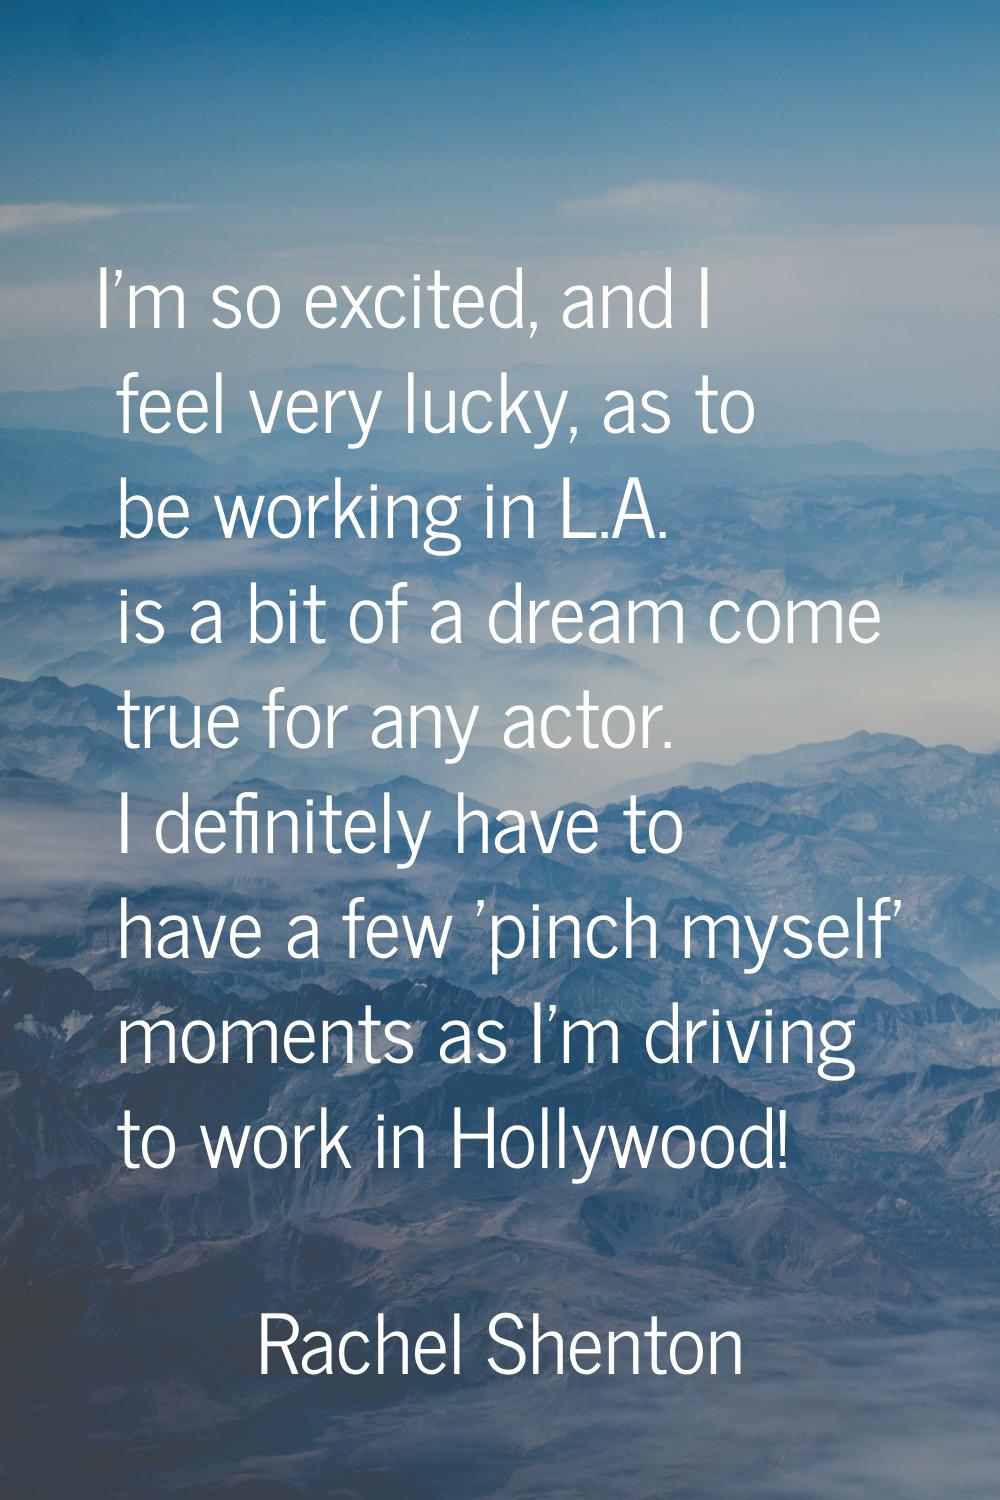 I'm so excited, and I feel very lucky, as to be working in L.A. is a bit of a dream come true for a